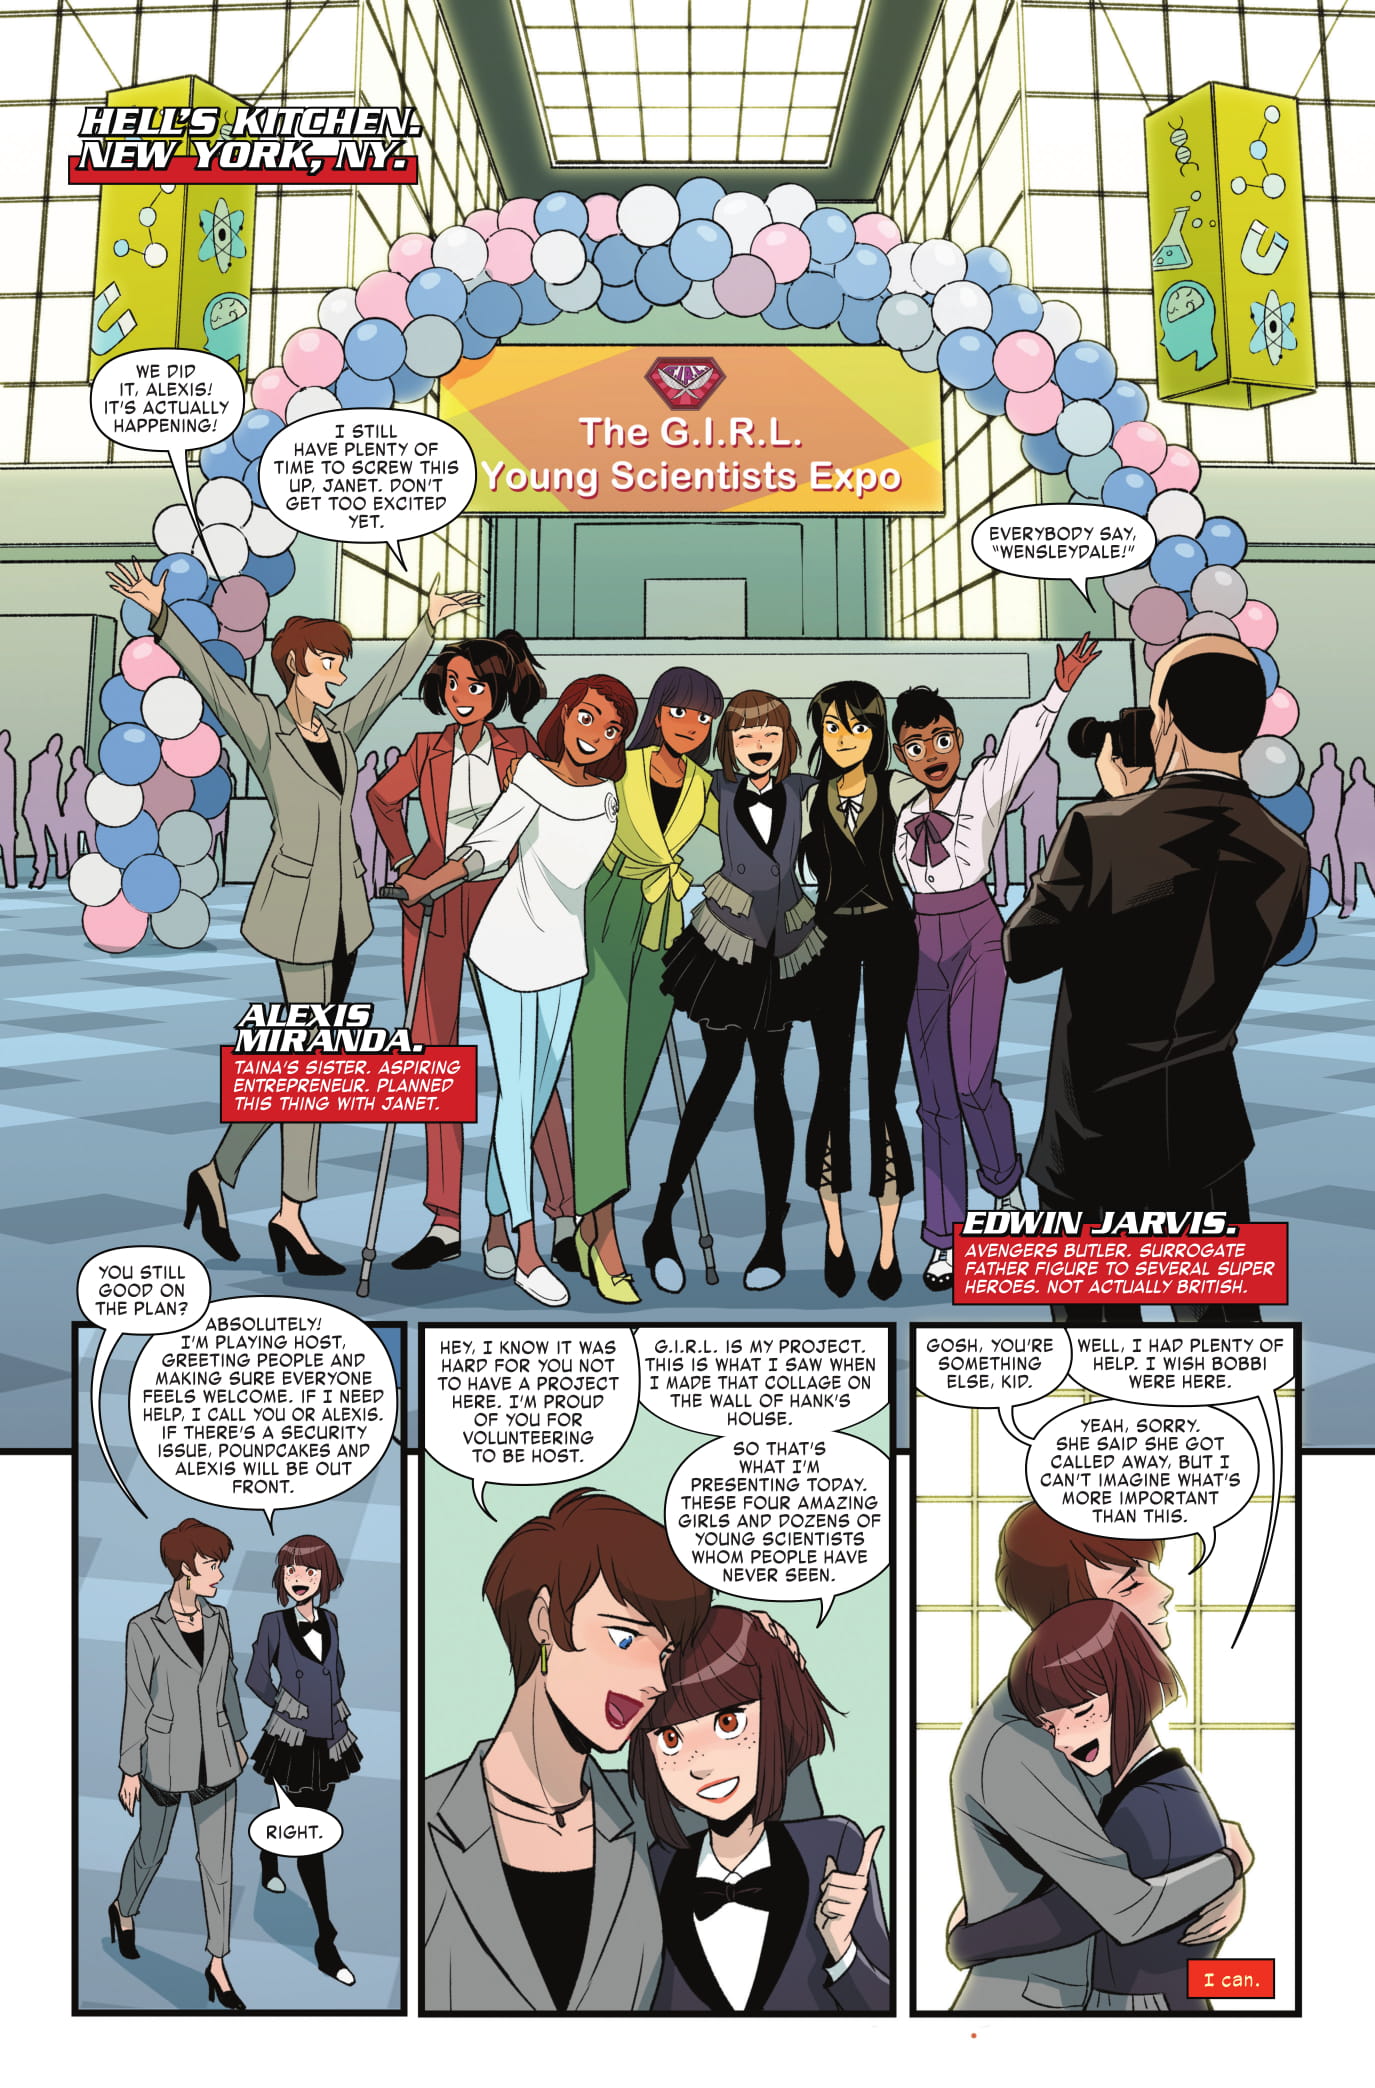 Unstoppable Wasp #8 preview page 3